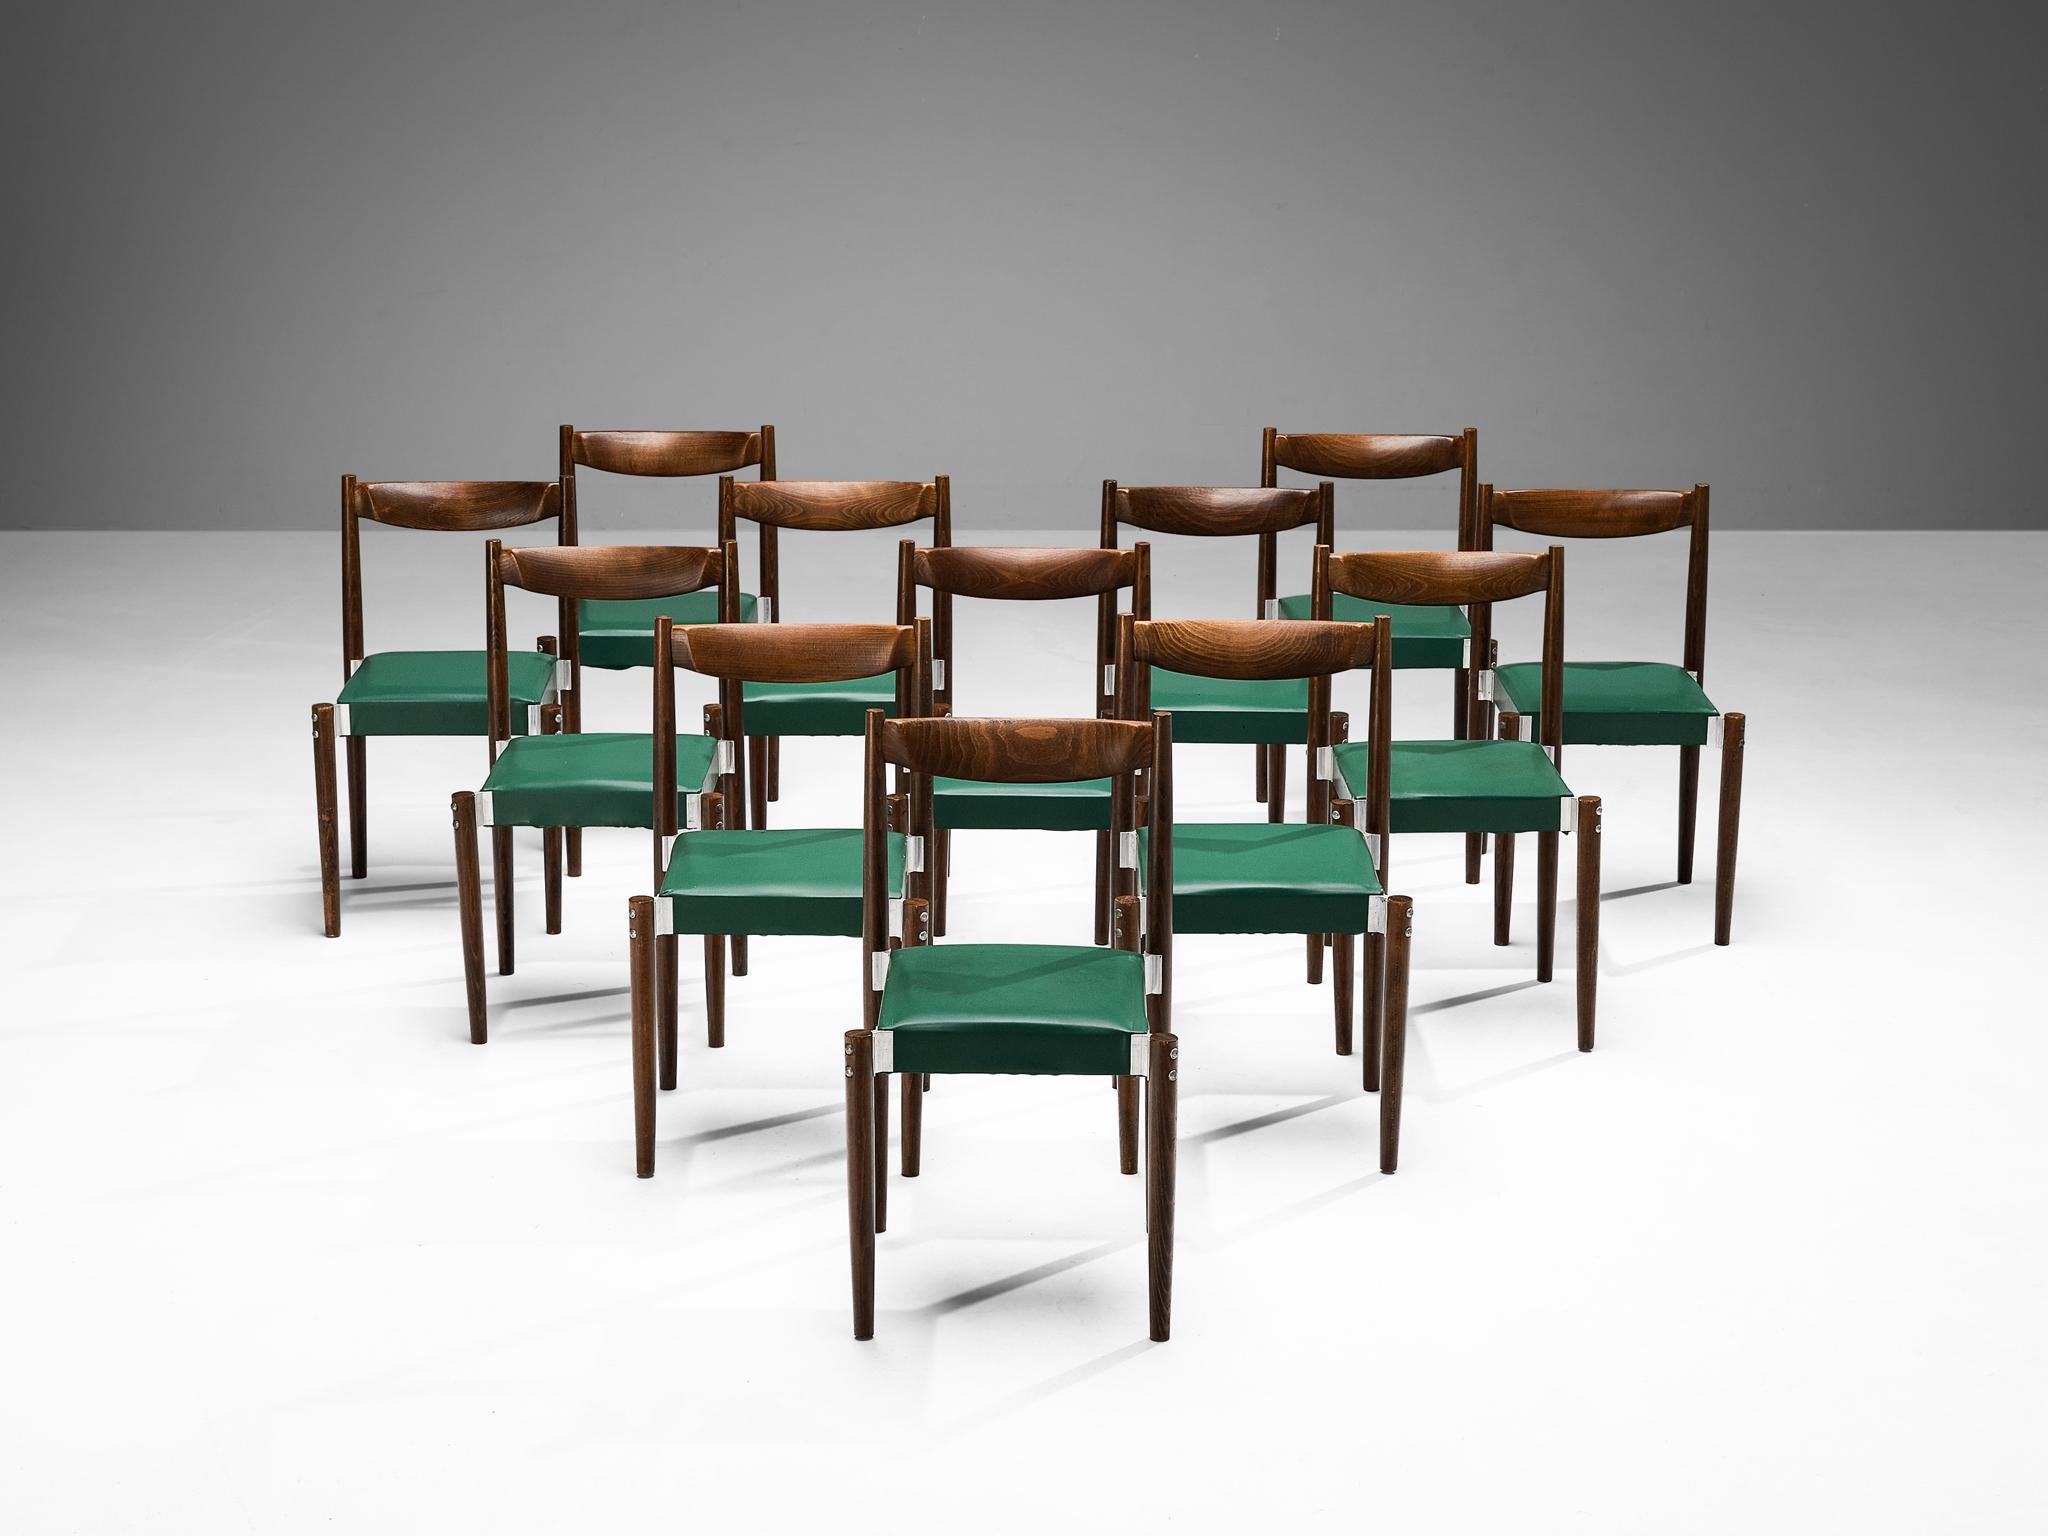 Set of twelve dining chairs, leatherette, stained beech, aluminum, Czech Republic, 1960s.

Well-proportioned set of dining chairs with constructive detailing discernible in the aluminum joints that connect the legs with the seat. The wooden frame